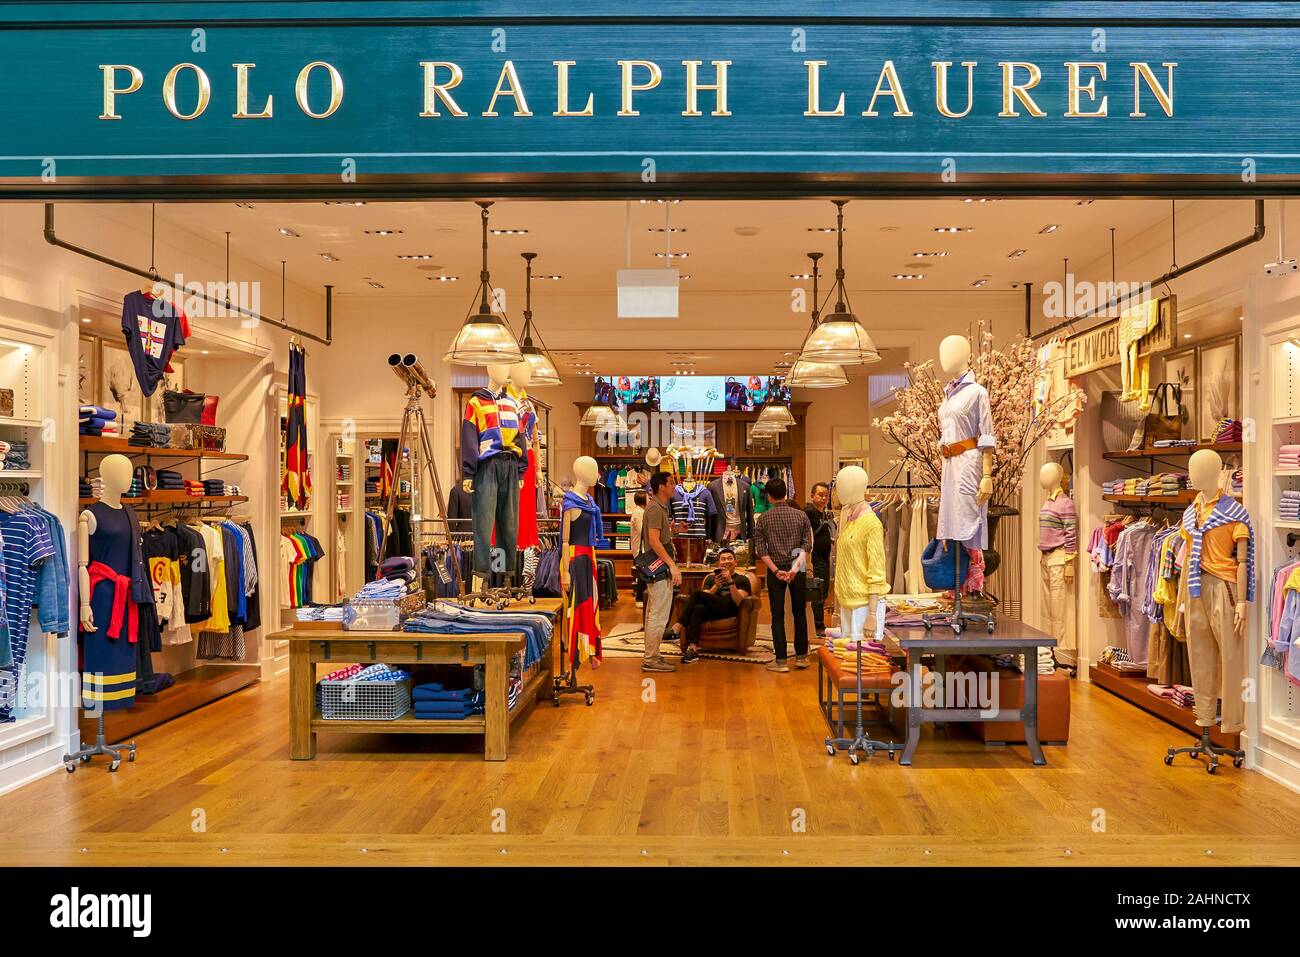 Ralph Lauren Logo High Resolution Stock Photography and Images - Alamy